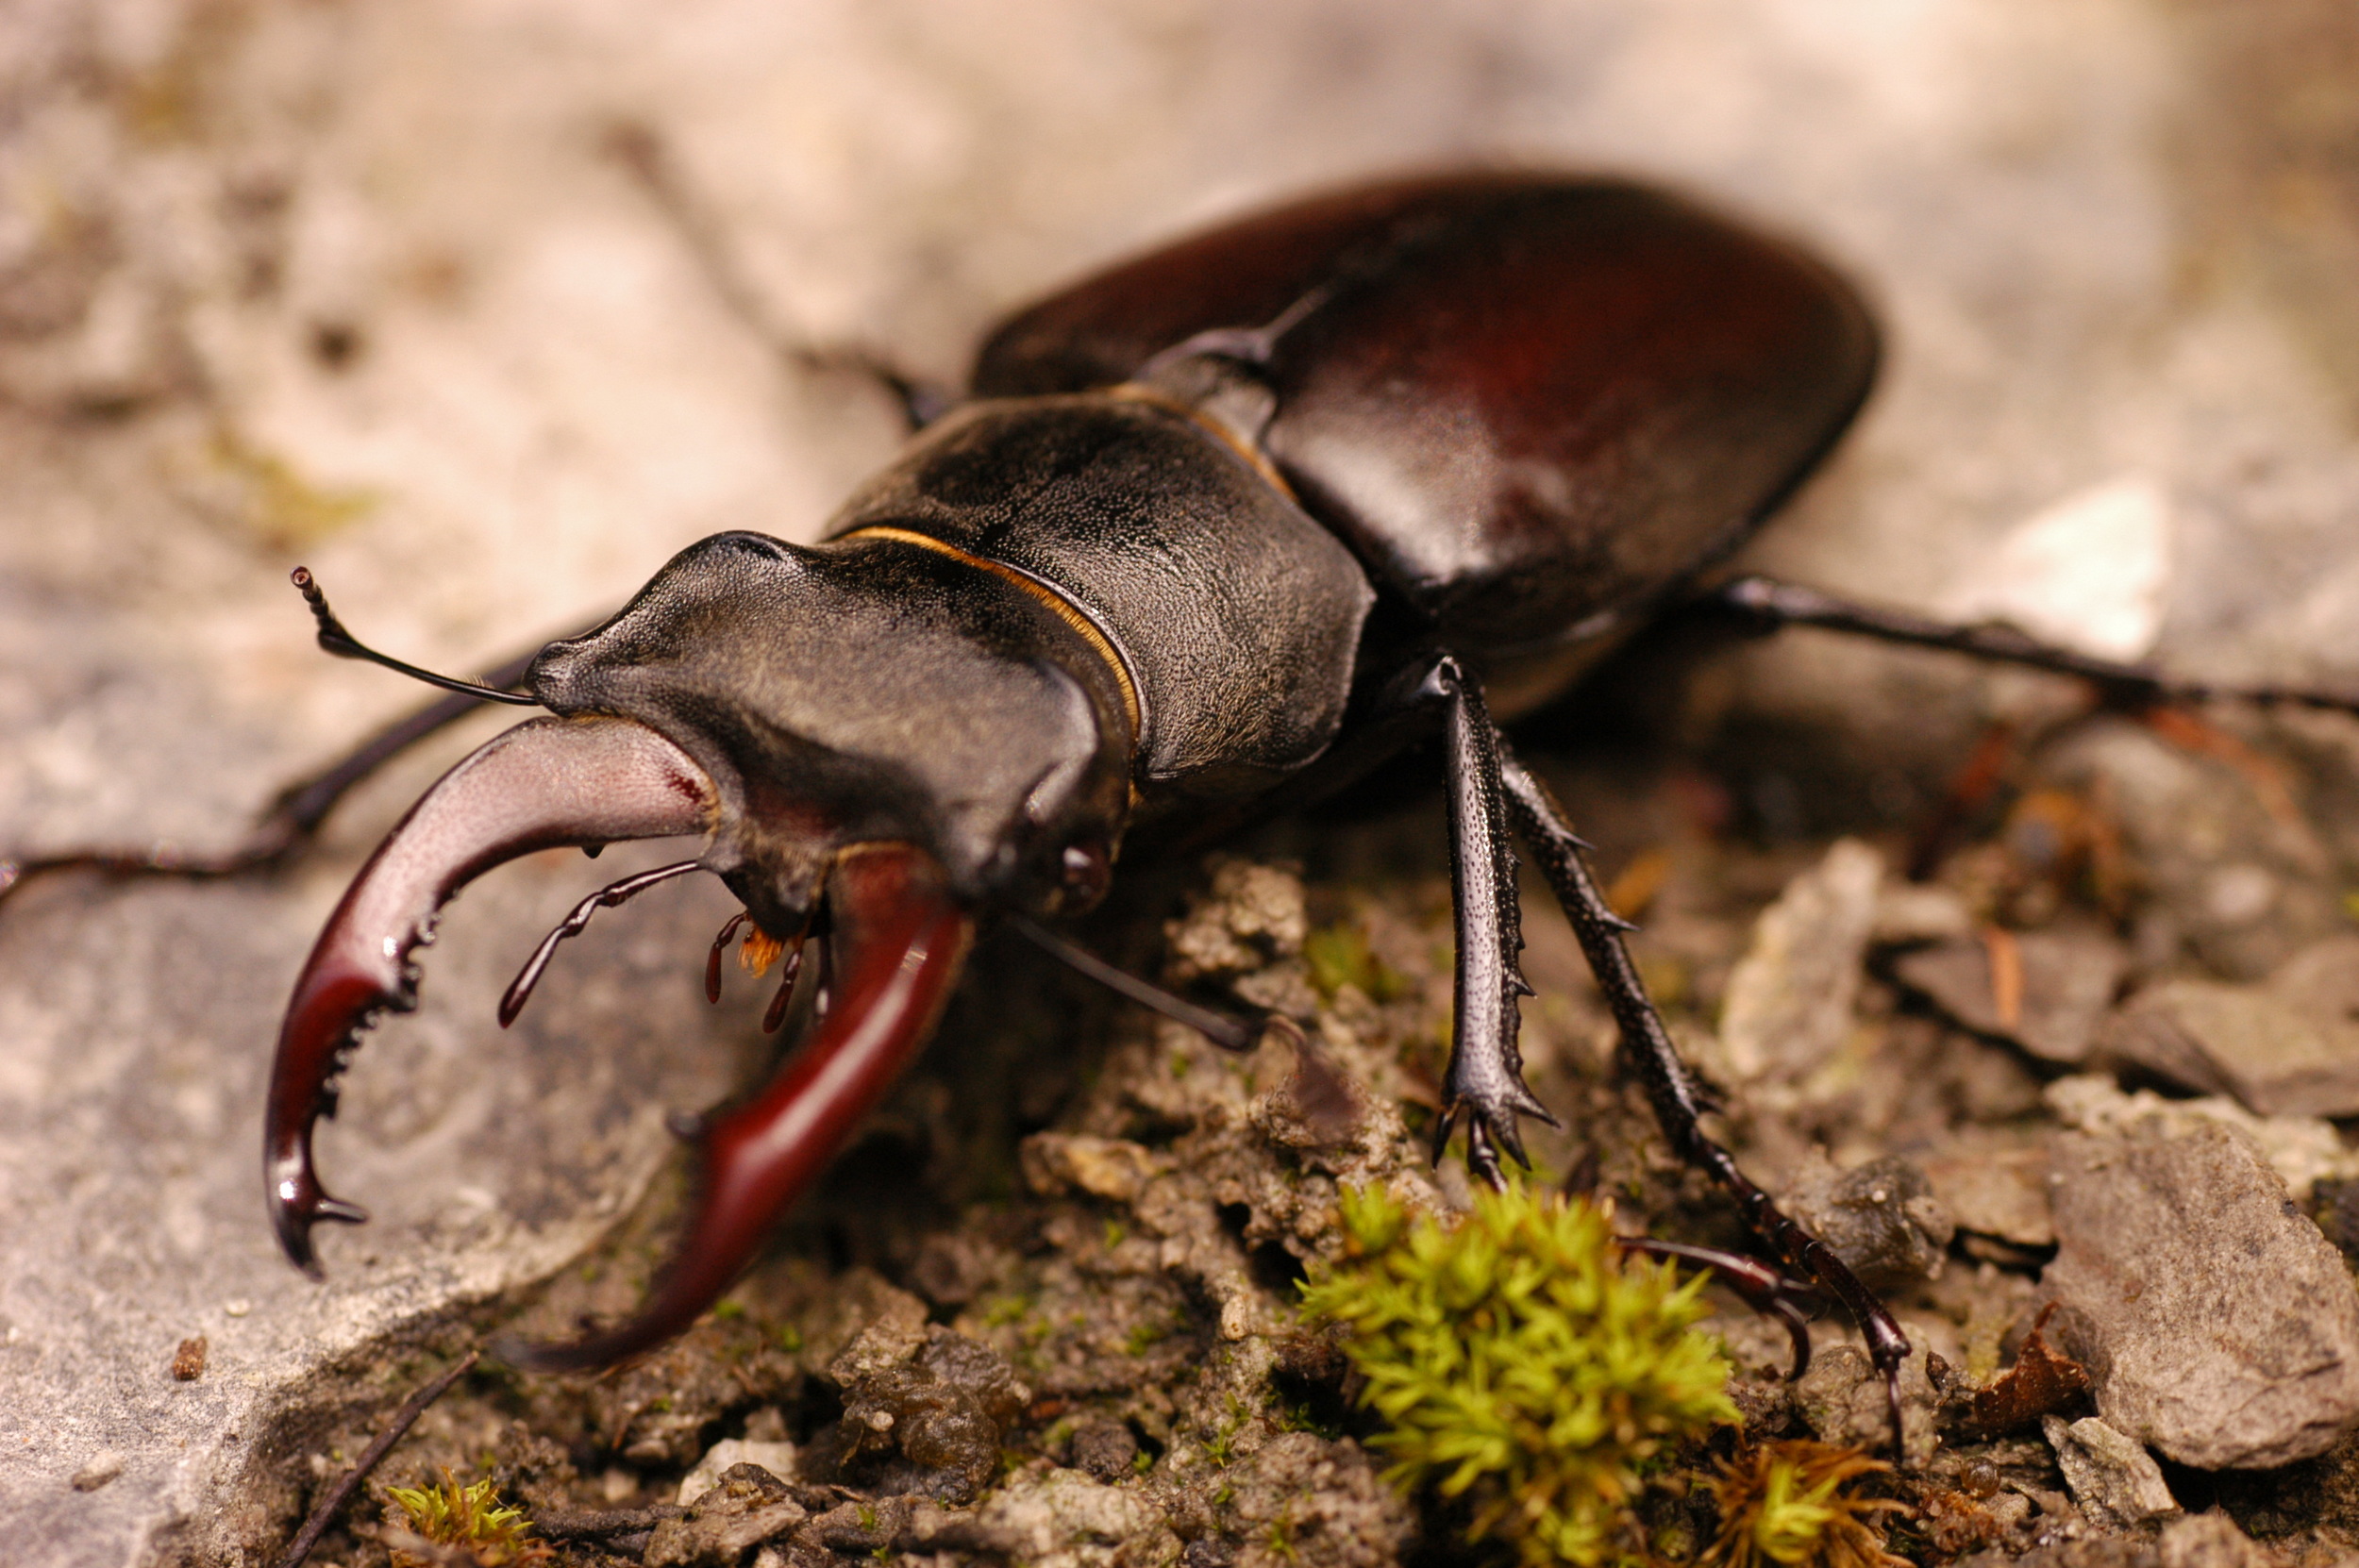  Invertebrates  The stag beetle  Lucanus cervus &nbsp;has been recorded. The stag beetle is Britain's largest terrestrial beetle- between 5cm and 8cm in length. A nationally scarce and globally threatened species, it is protected under the Wildlife a